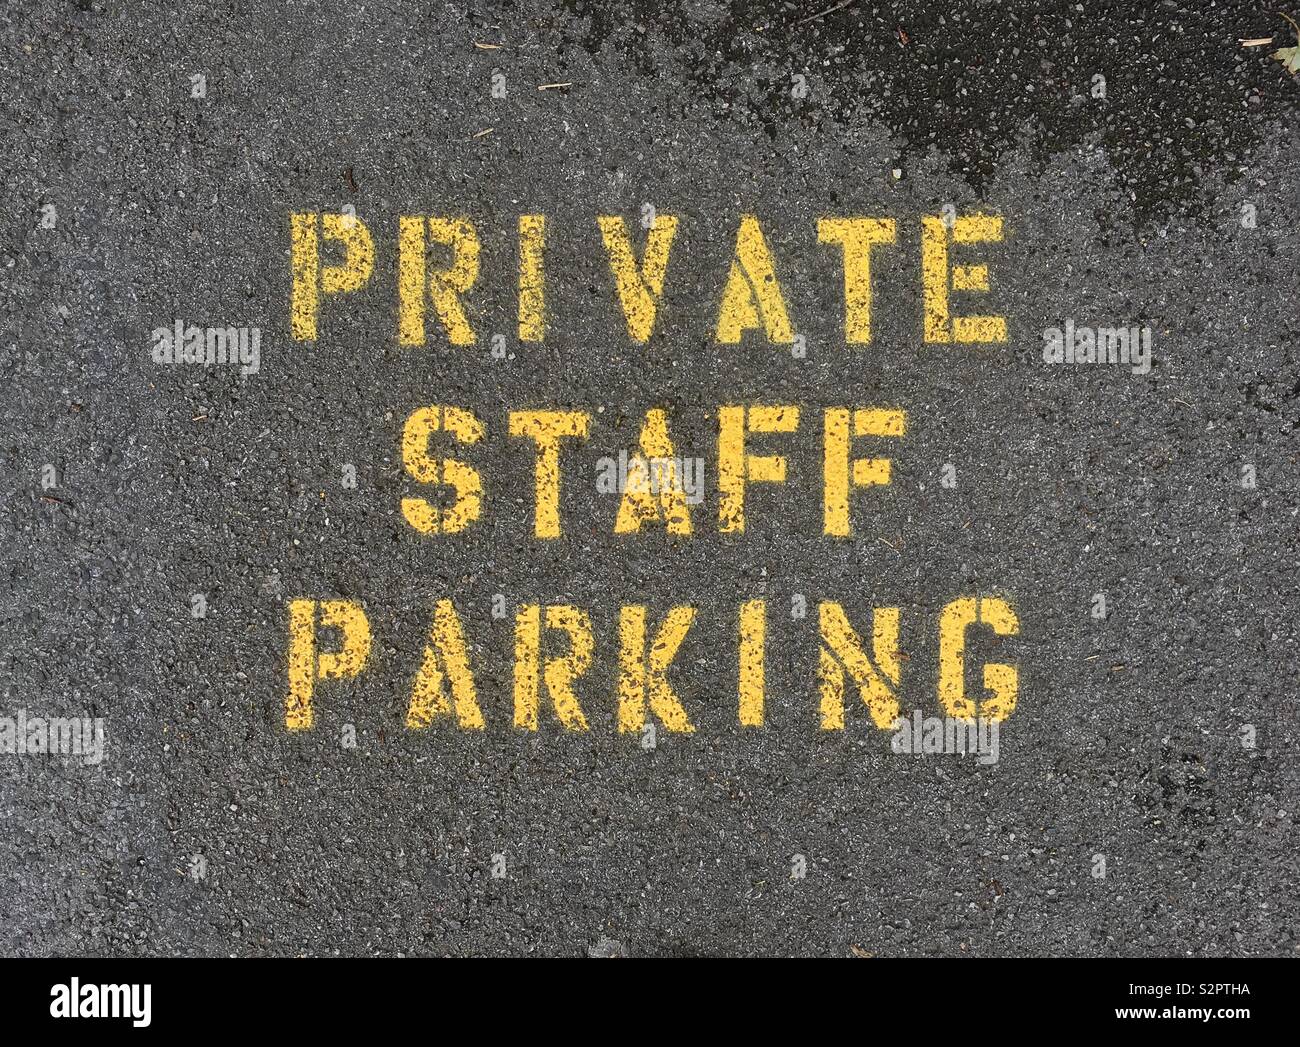 A sign reading “PRIVATE STAFF PARKING” spray-painted on a pavement Stock Photo